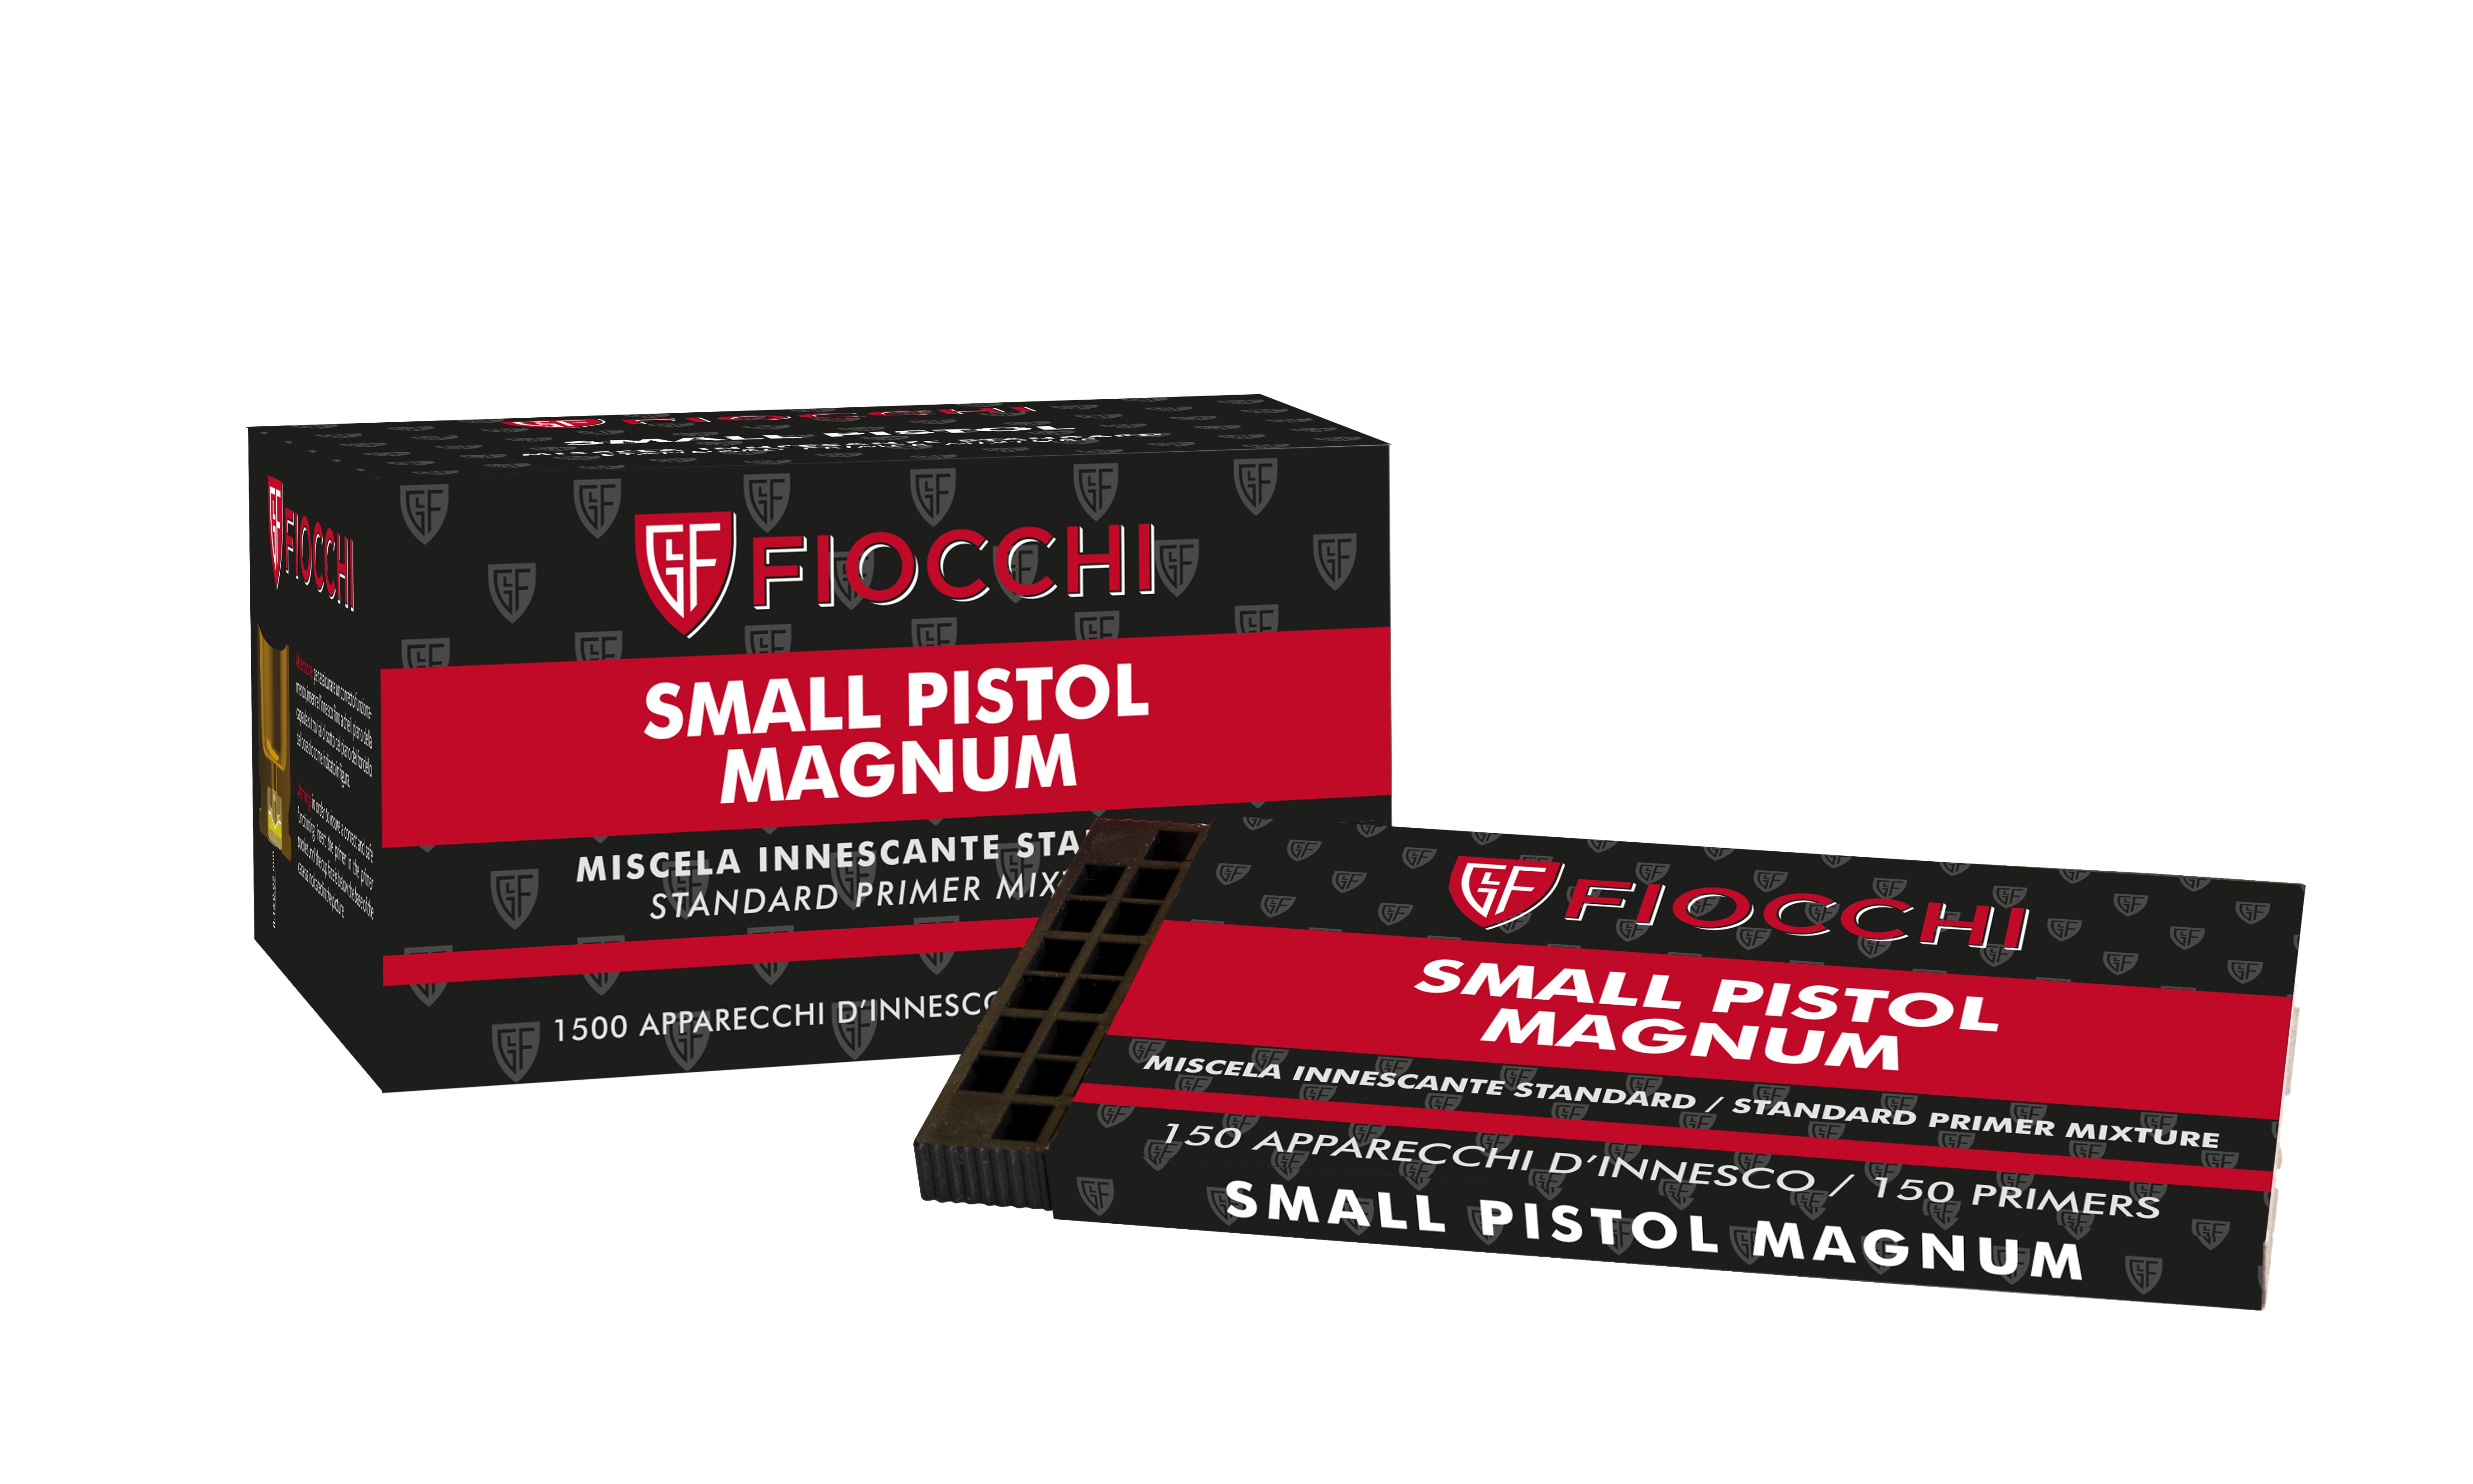 Fiocchi Small Pistol Magnum fnghtter, 1.500 stk.